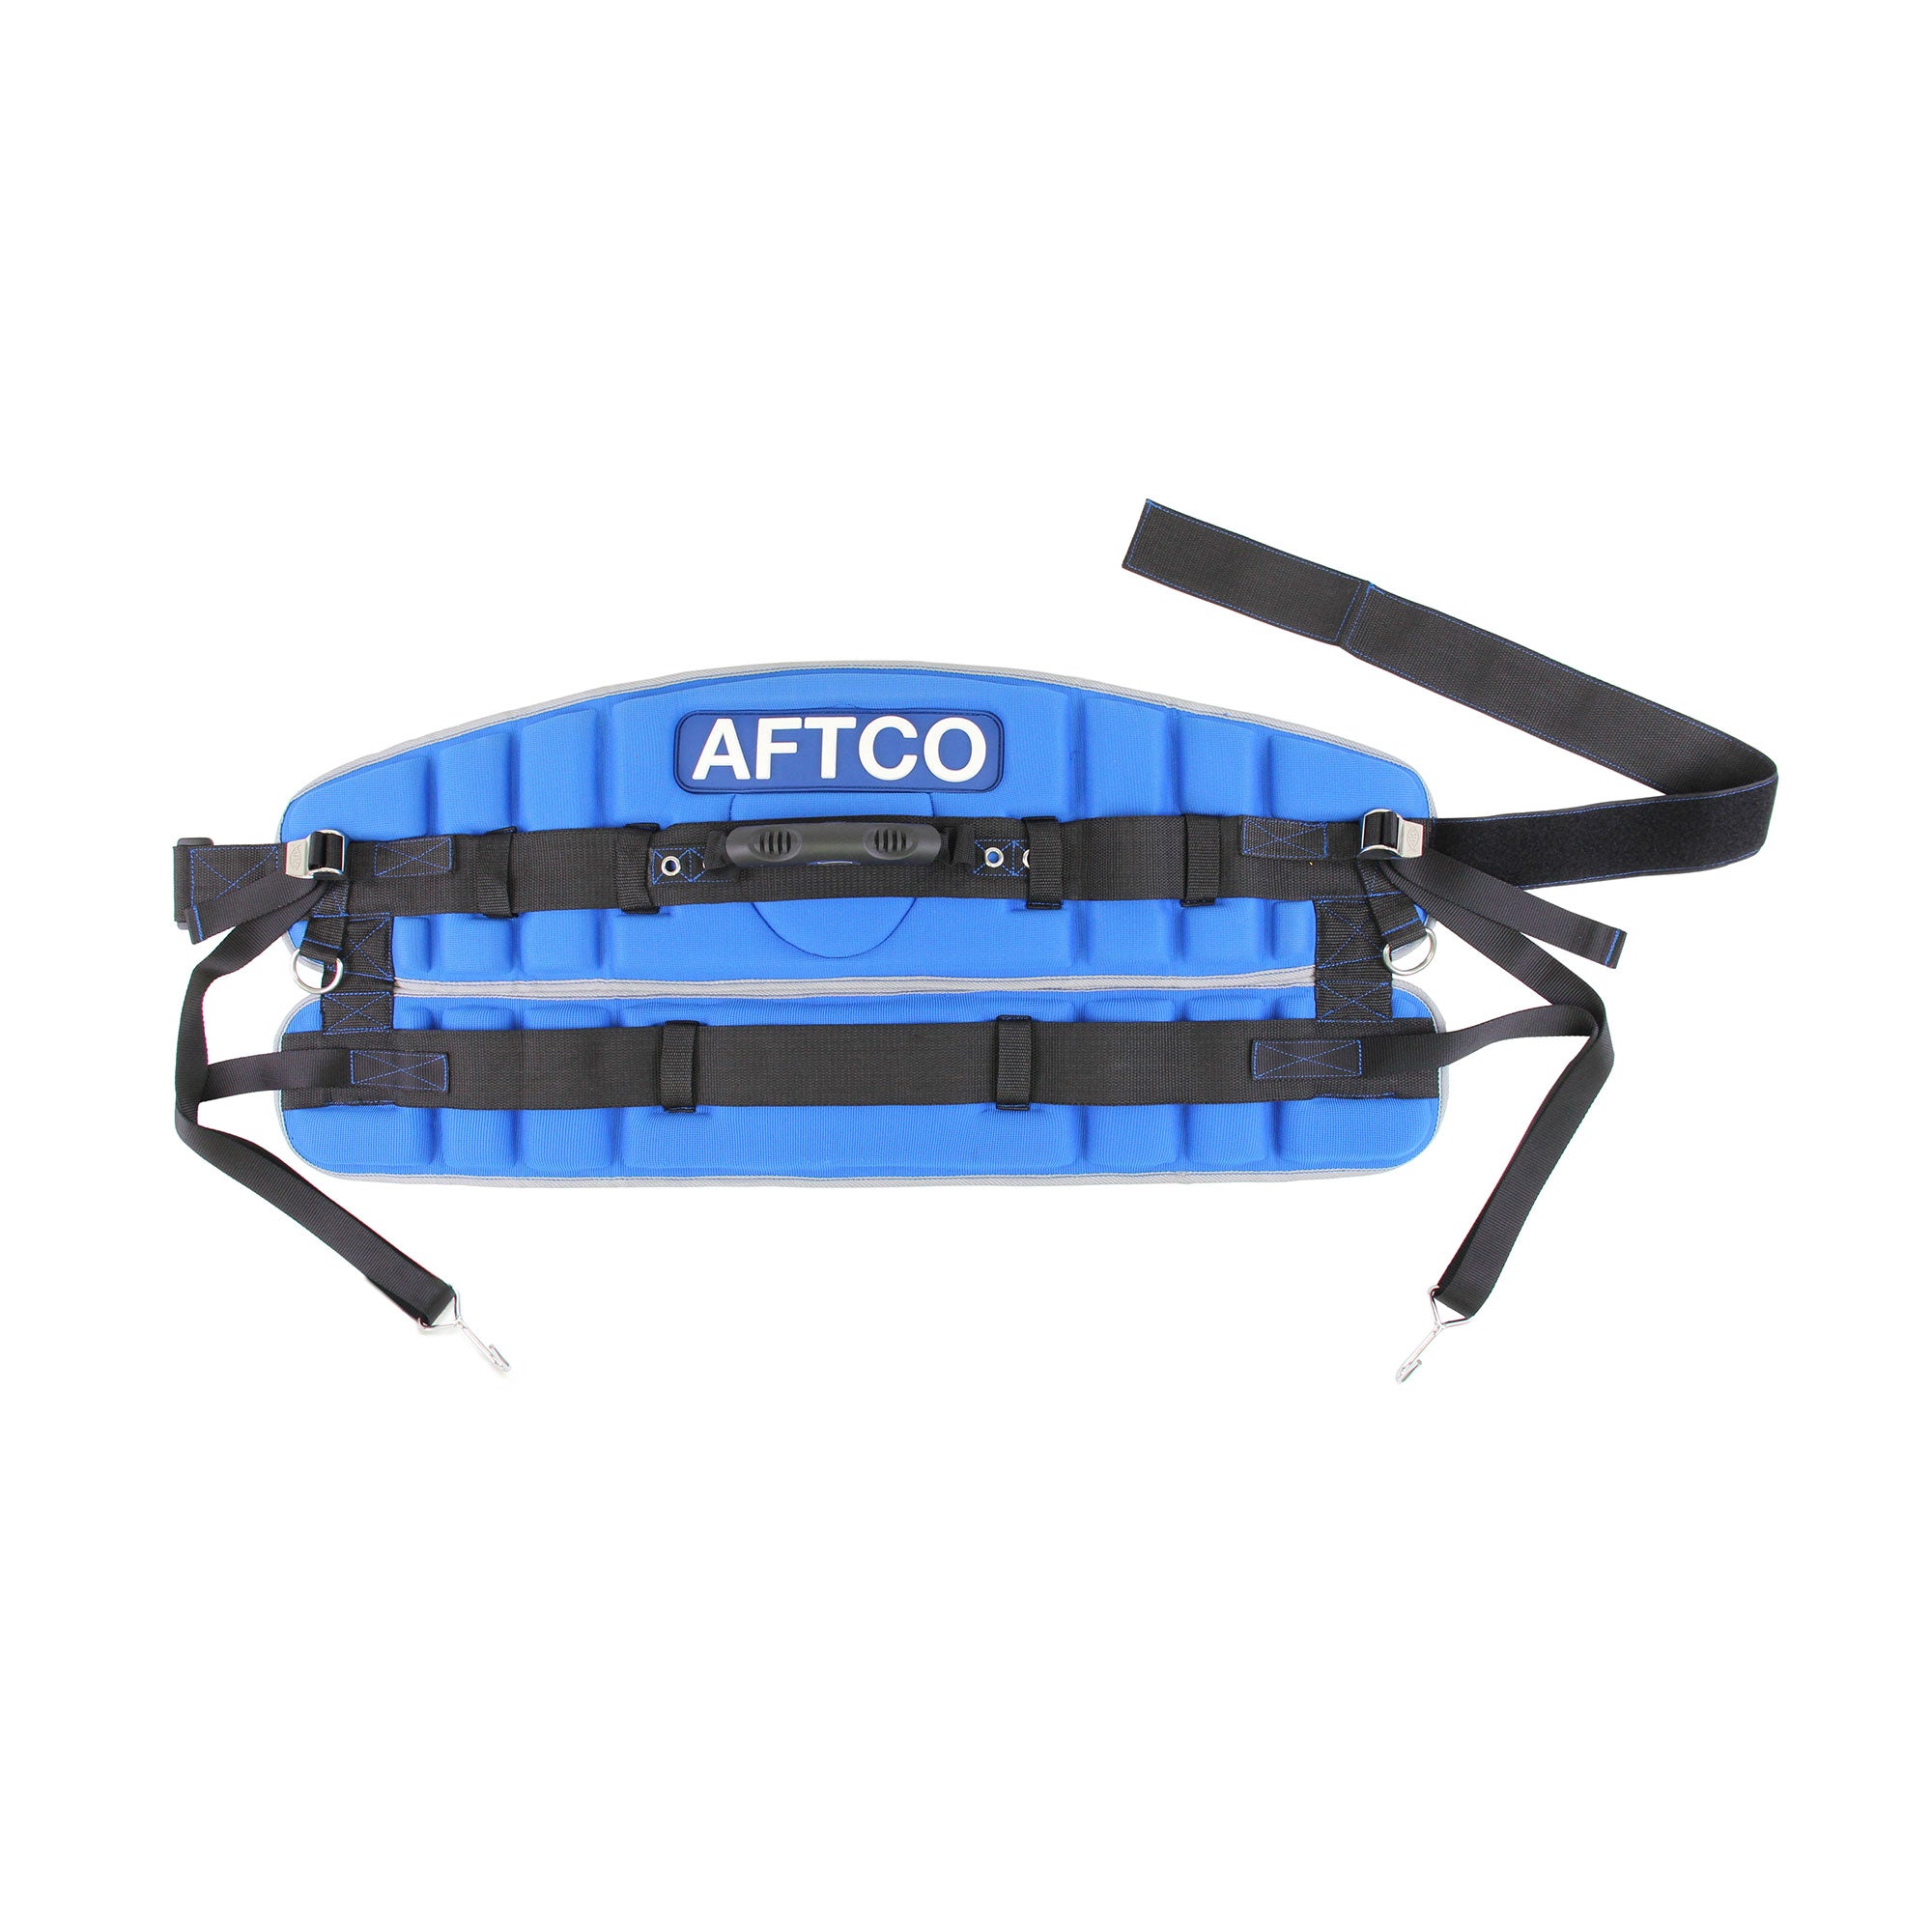 Aftco Ultimate Stand-Up Harness - MaxForce – lmr tackle